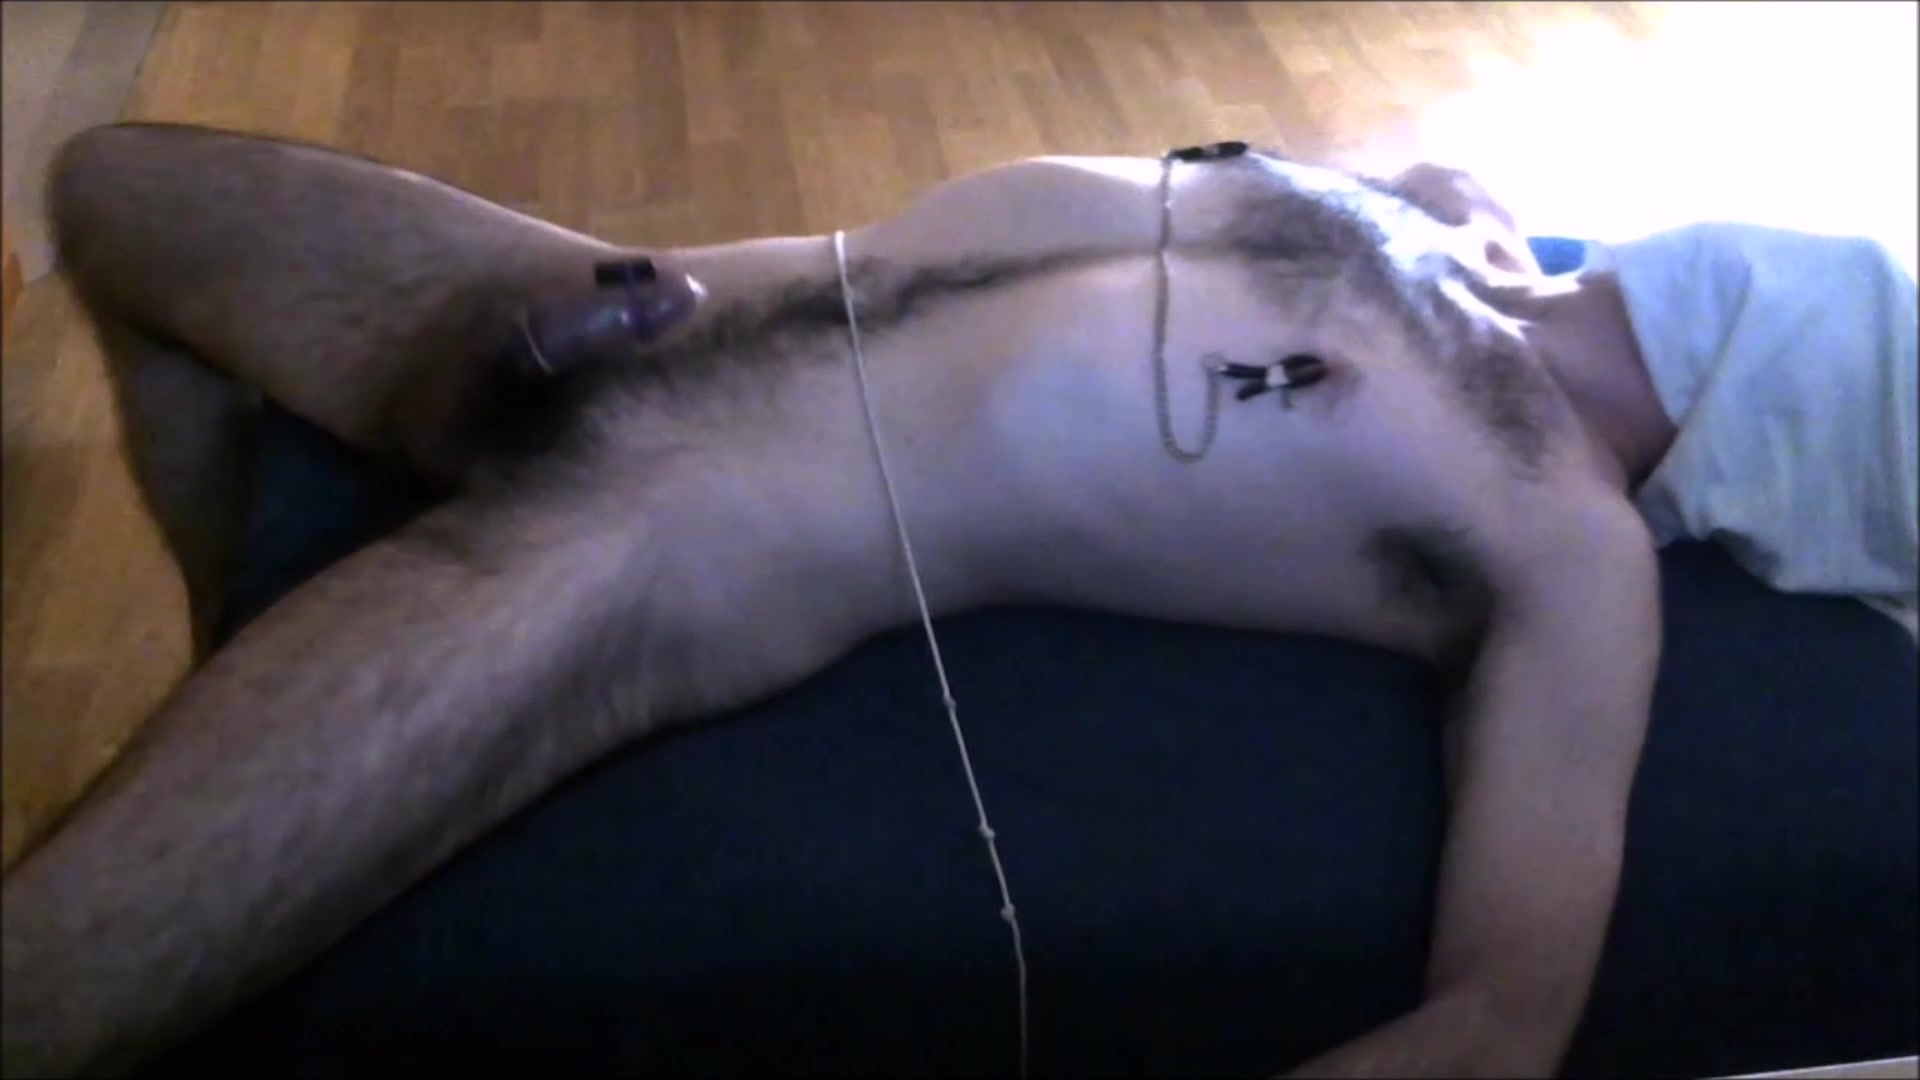 Male tied, edged with vibrator and nipple clamps. Orgasm denial.